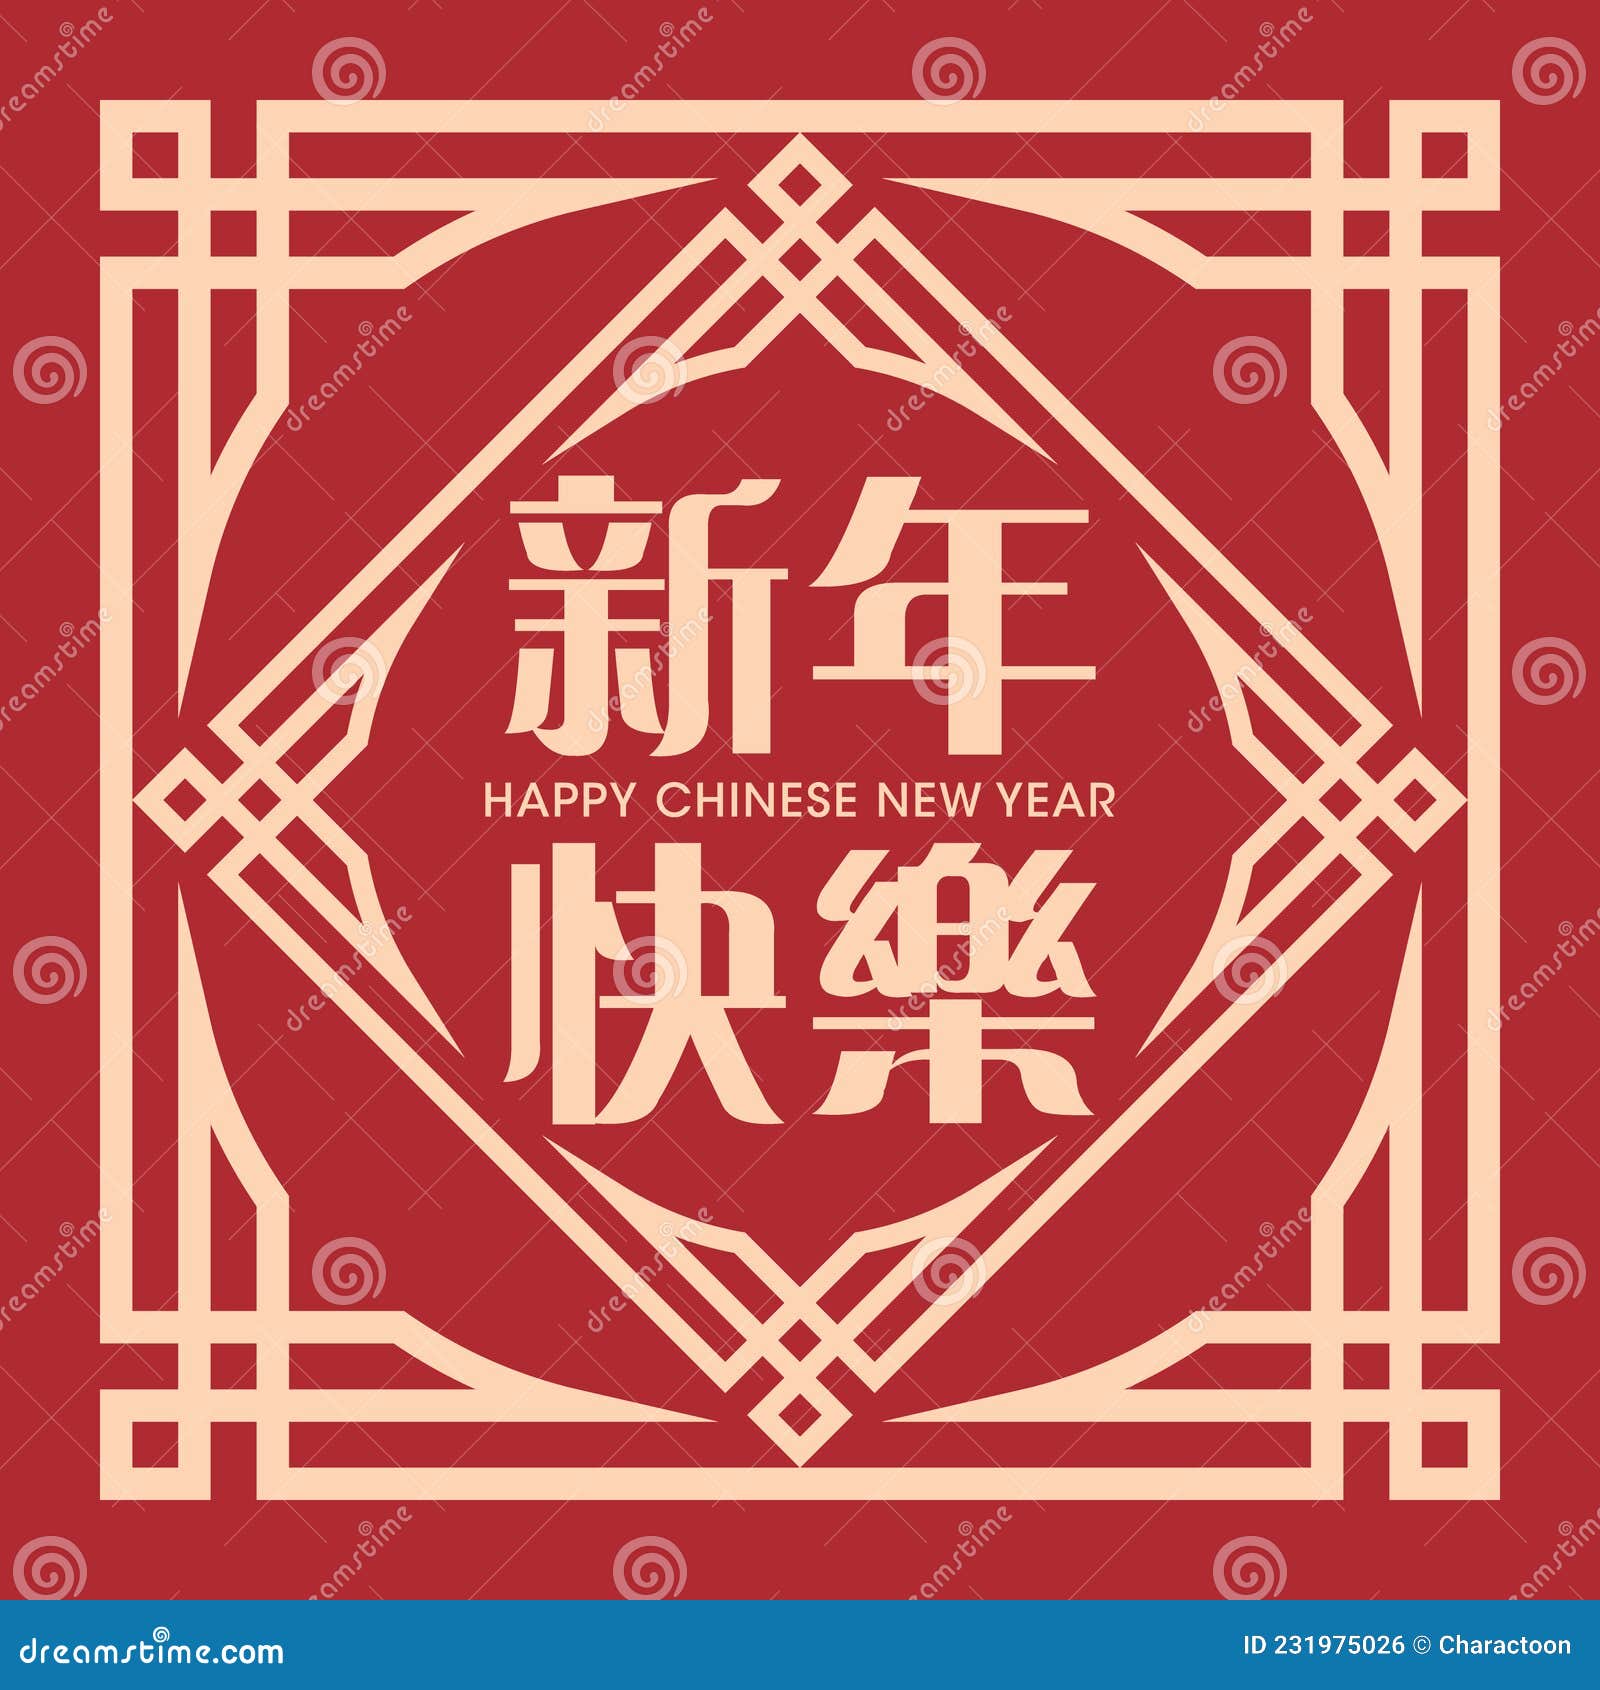 chinese new year greetings spring couplet. decorative vintage oriental frame  on red